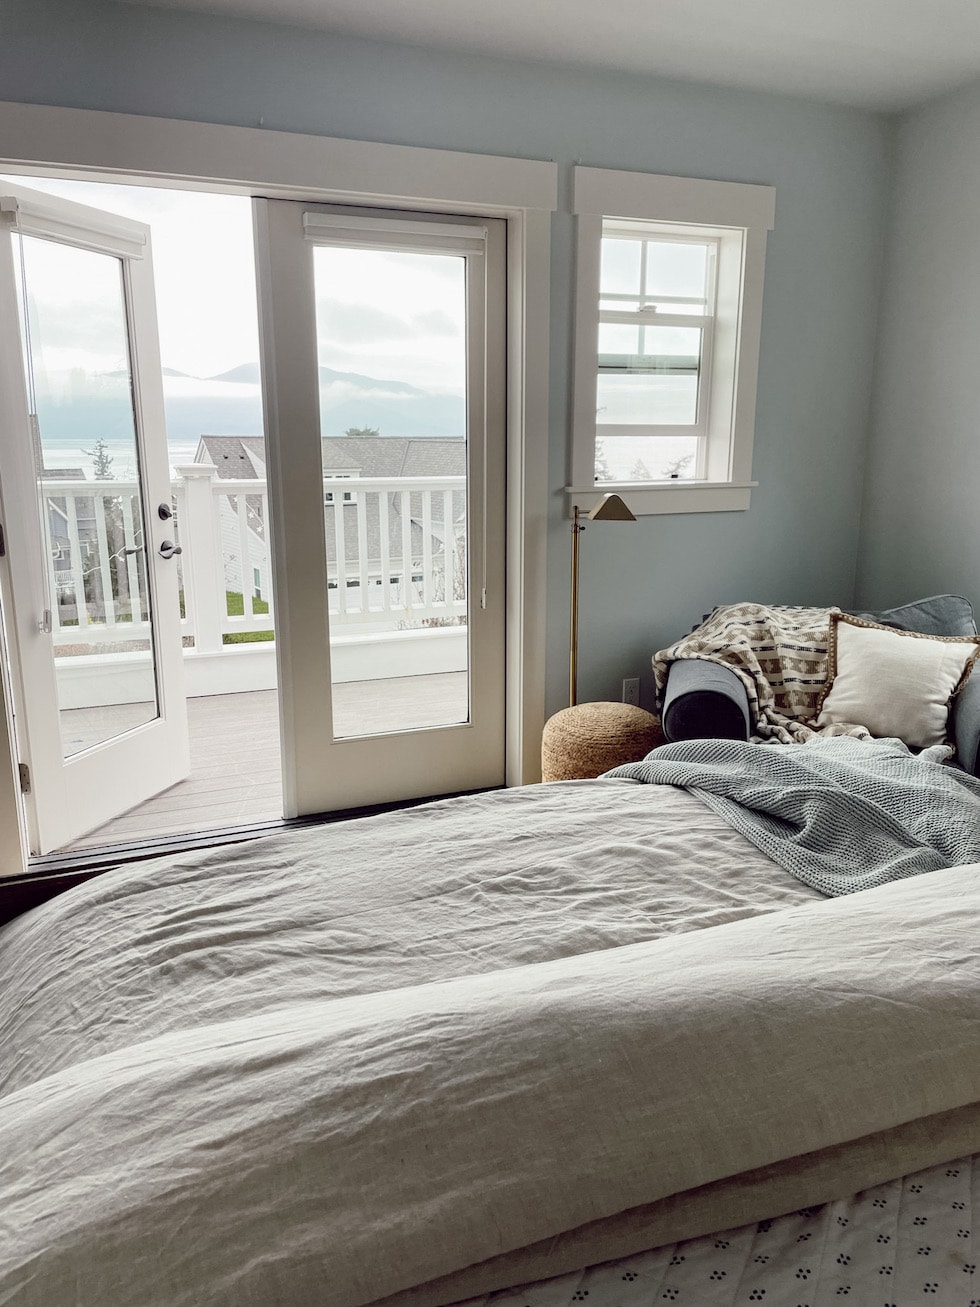 Our New Beach House Tour with Before Photos I Haven't Shared!